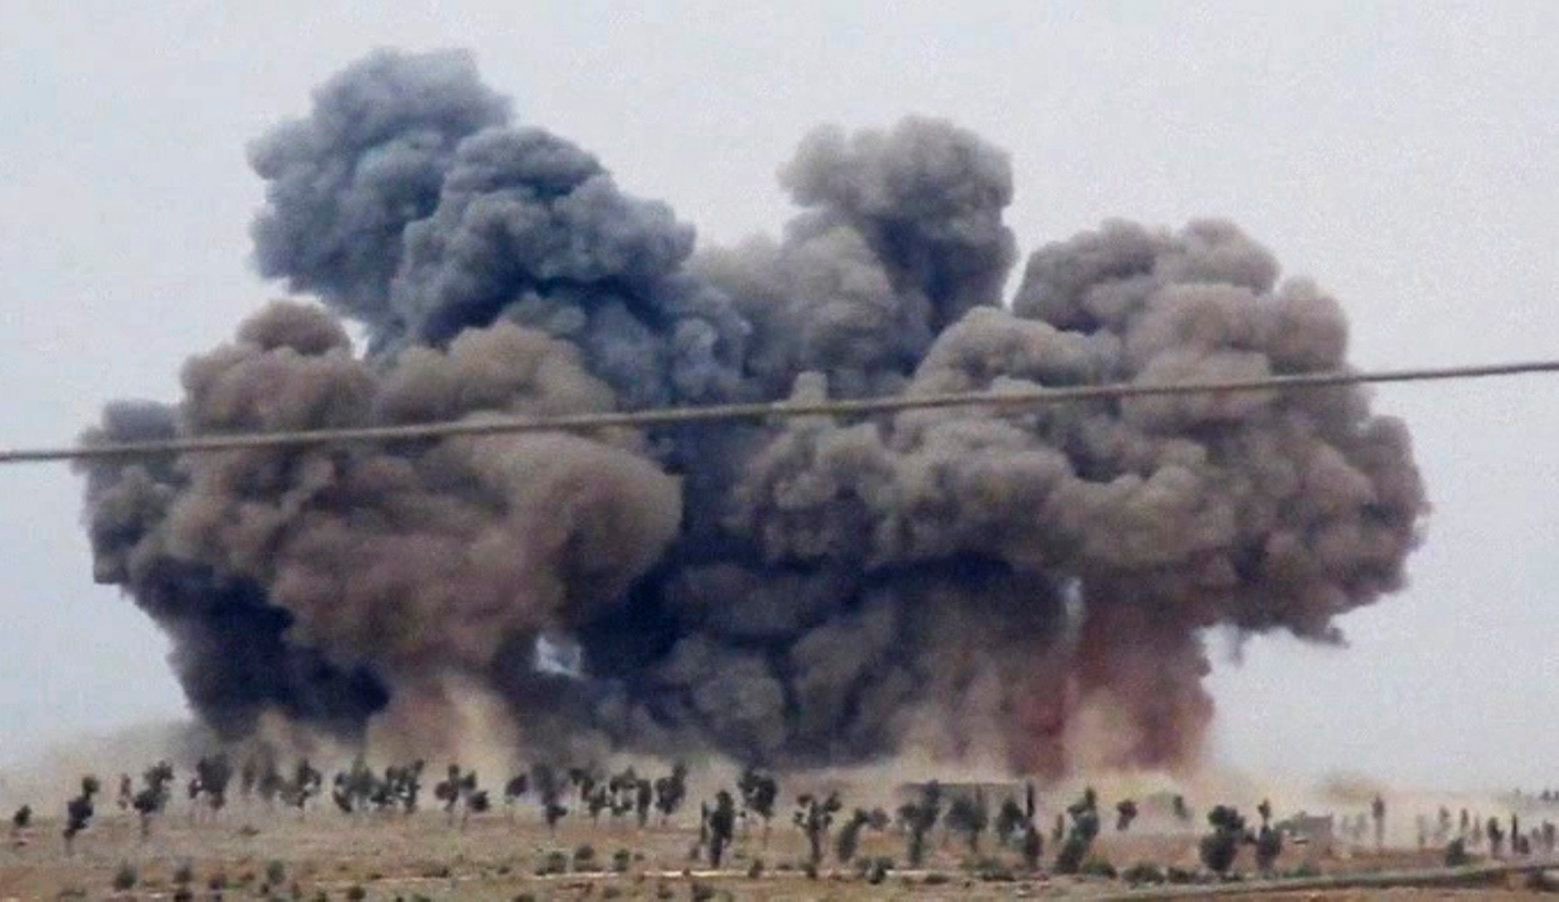 In this image made from video provided by Hadi Al-Abdallah, which has been verified and is consistent with other AP reporting, smoke rises after airstrikes in Kafr Nabel of the Idlib province, western Syria, Thursday, Oct. 1, 2015. Russian jets carried out a second day of airstrikes in Syria Thursday, but there were conflicting claims about whether they were targeting Islamic State and al-Qaeda militants or trying to shore up the defenses of President Bashar Assad. (Hadi Al-Abdallah via AP) APTOPIX Mideast Syria